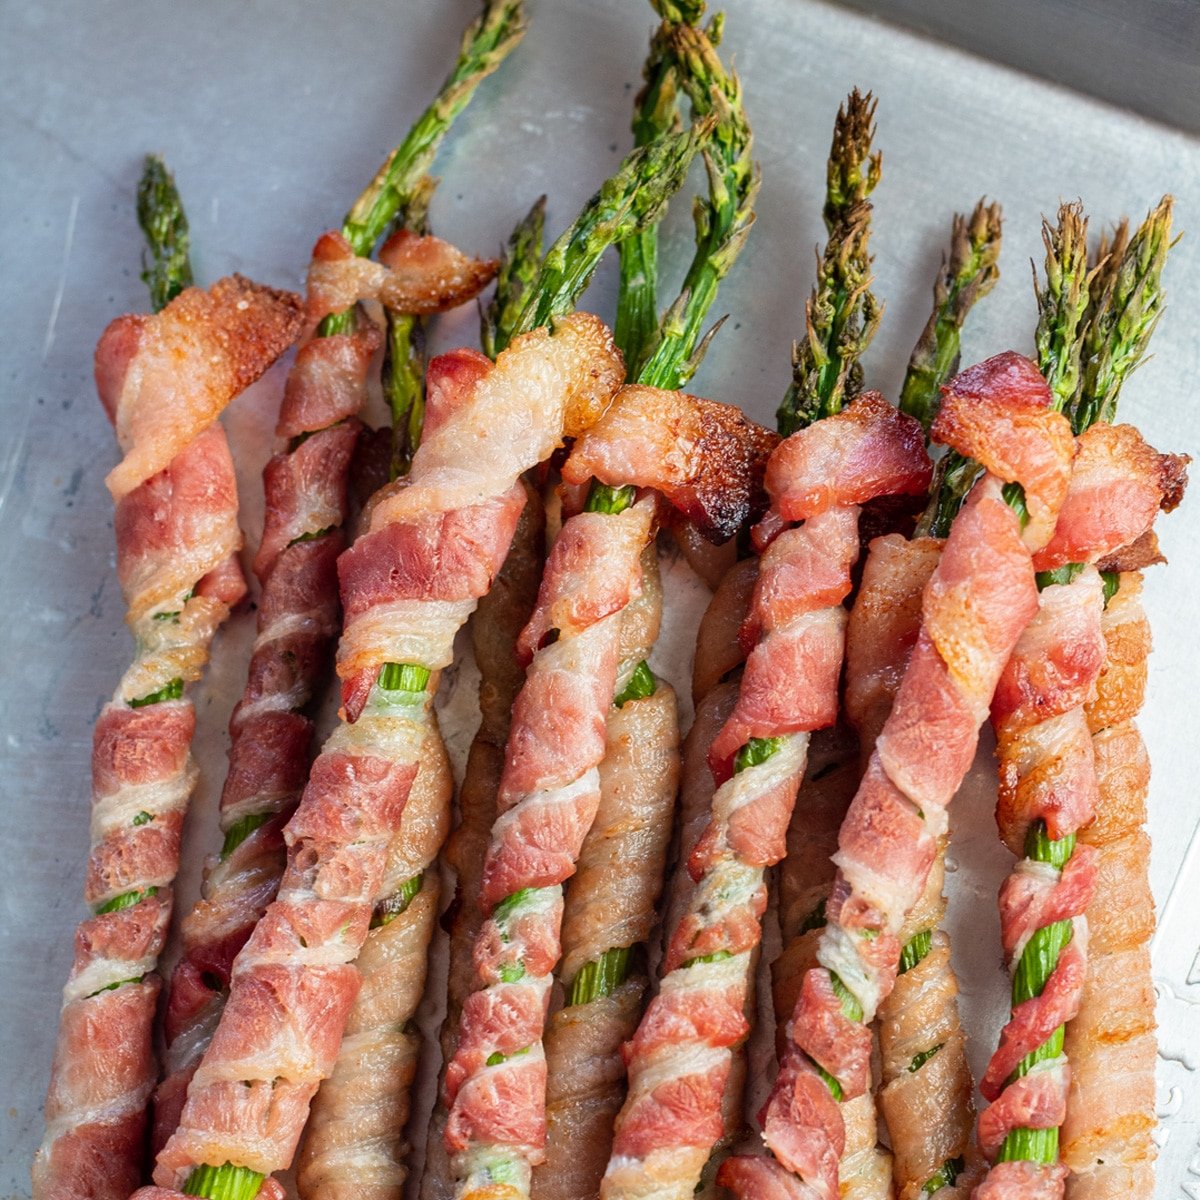 Delicious baked bacon wrapped asparagus spears on metal tray.